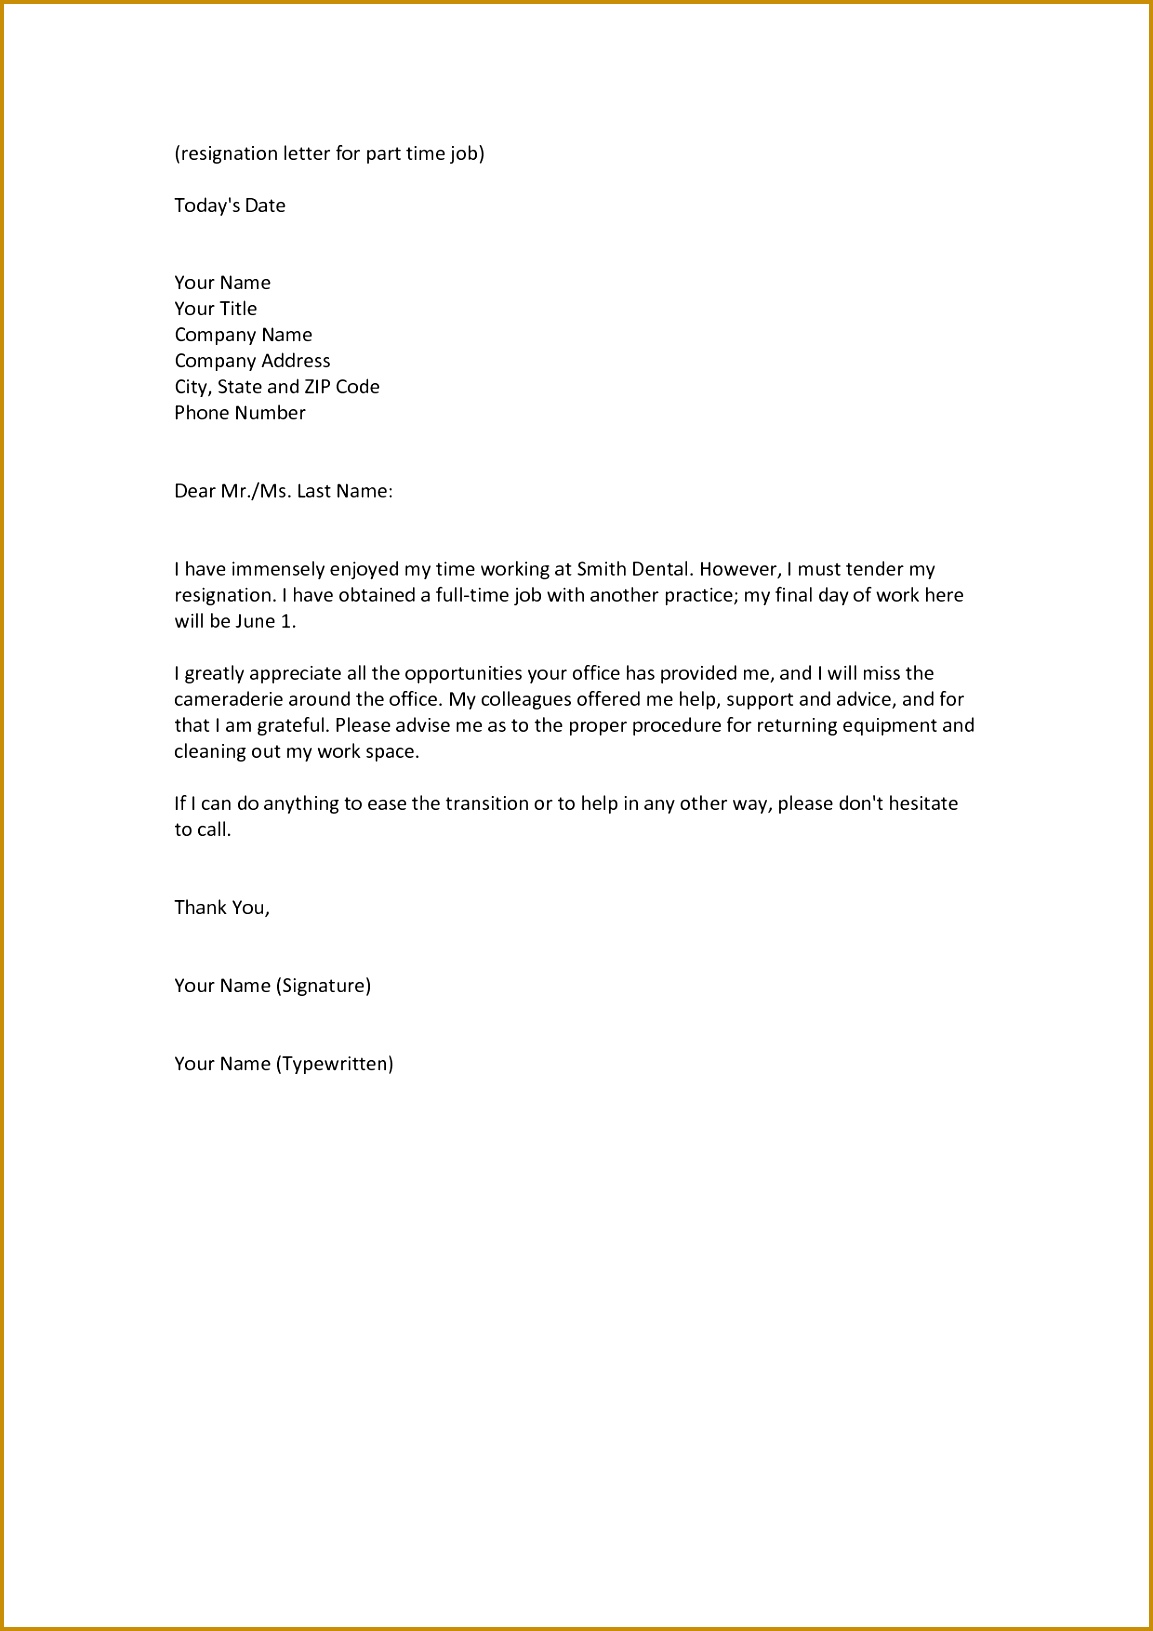 6 Resignation Letter Due to Relocation Sample FabTemplatez